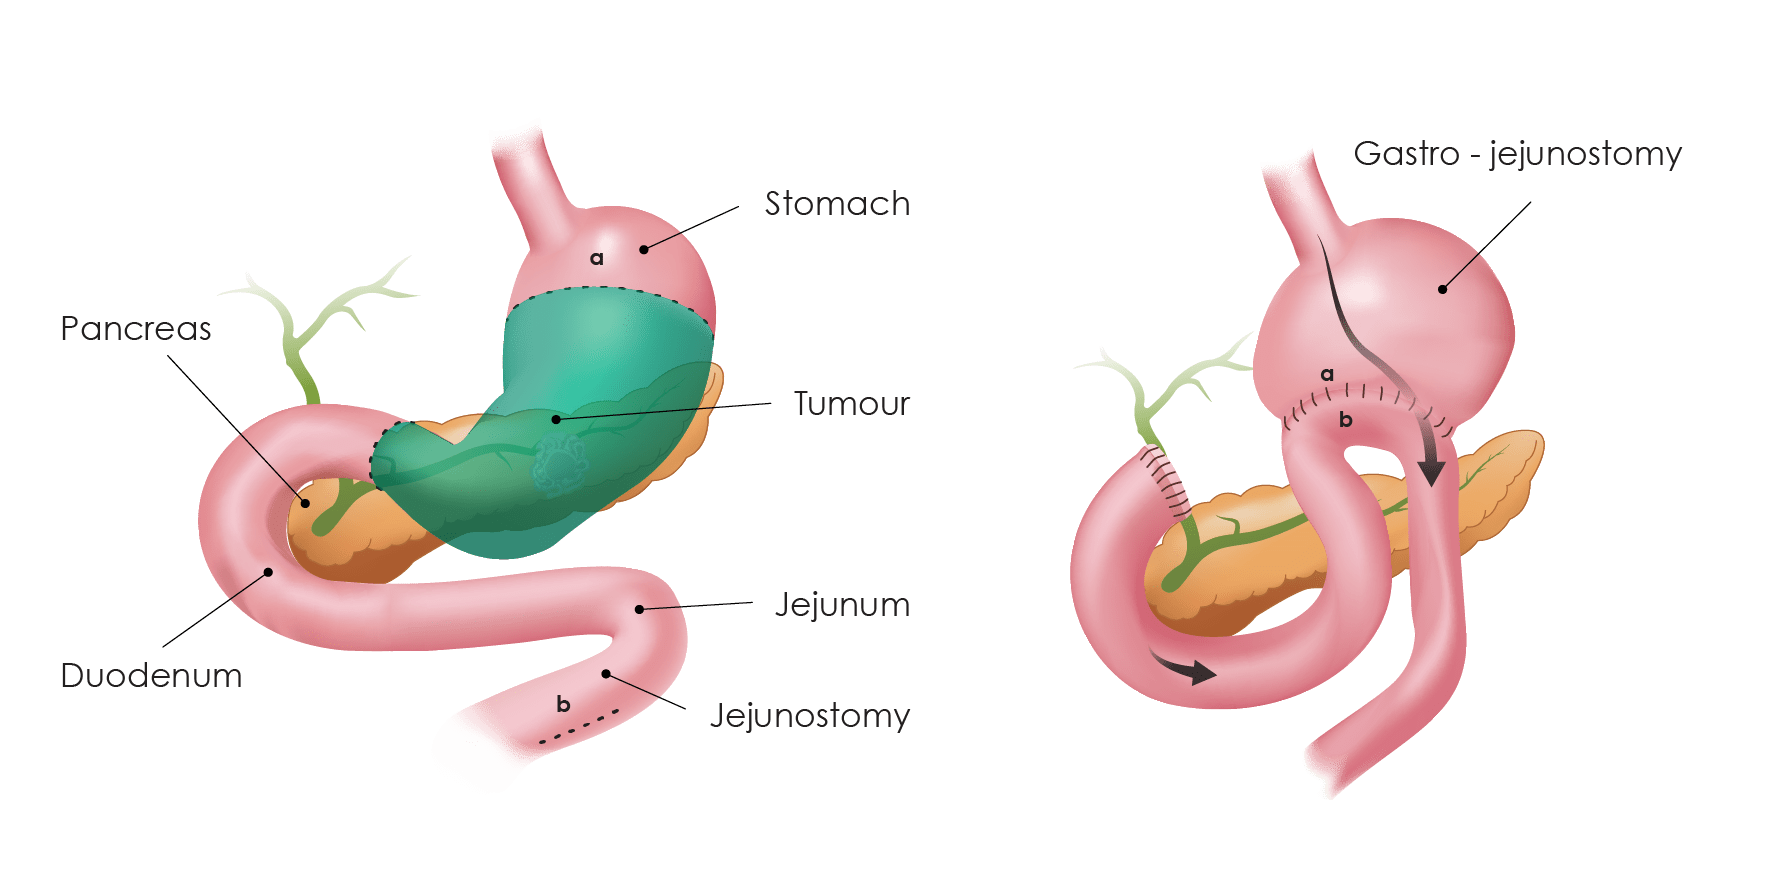 1.3.Gastrectomy partial withlegend